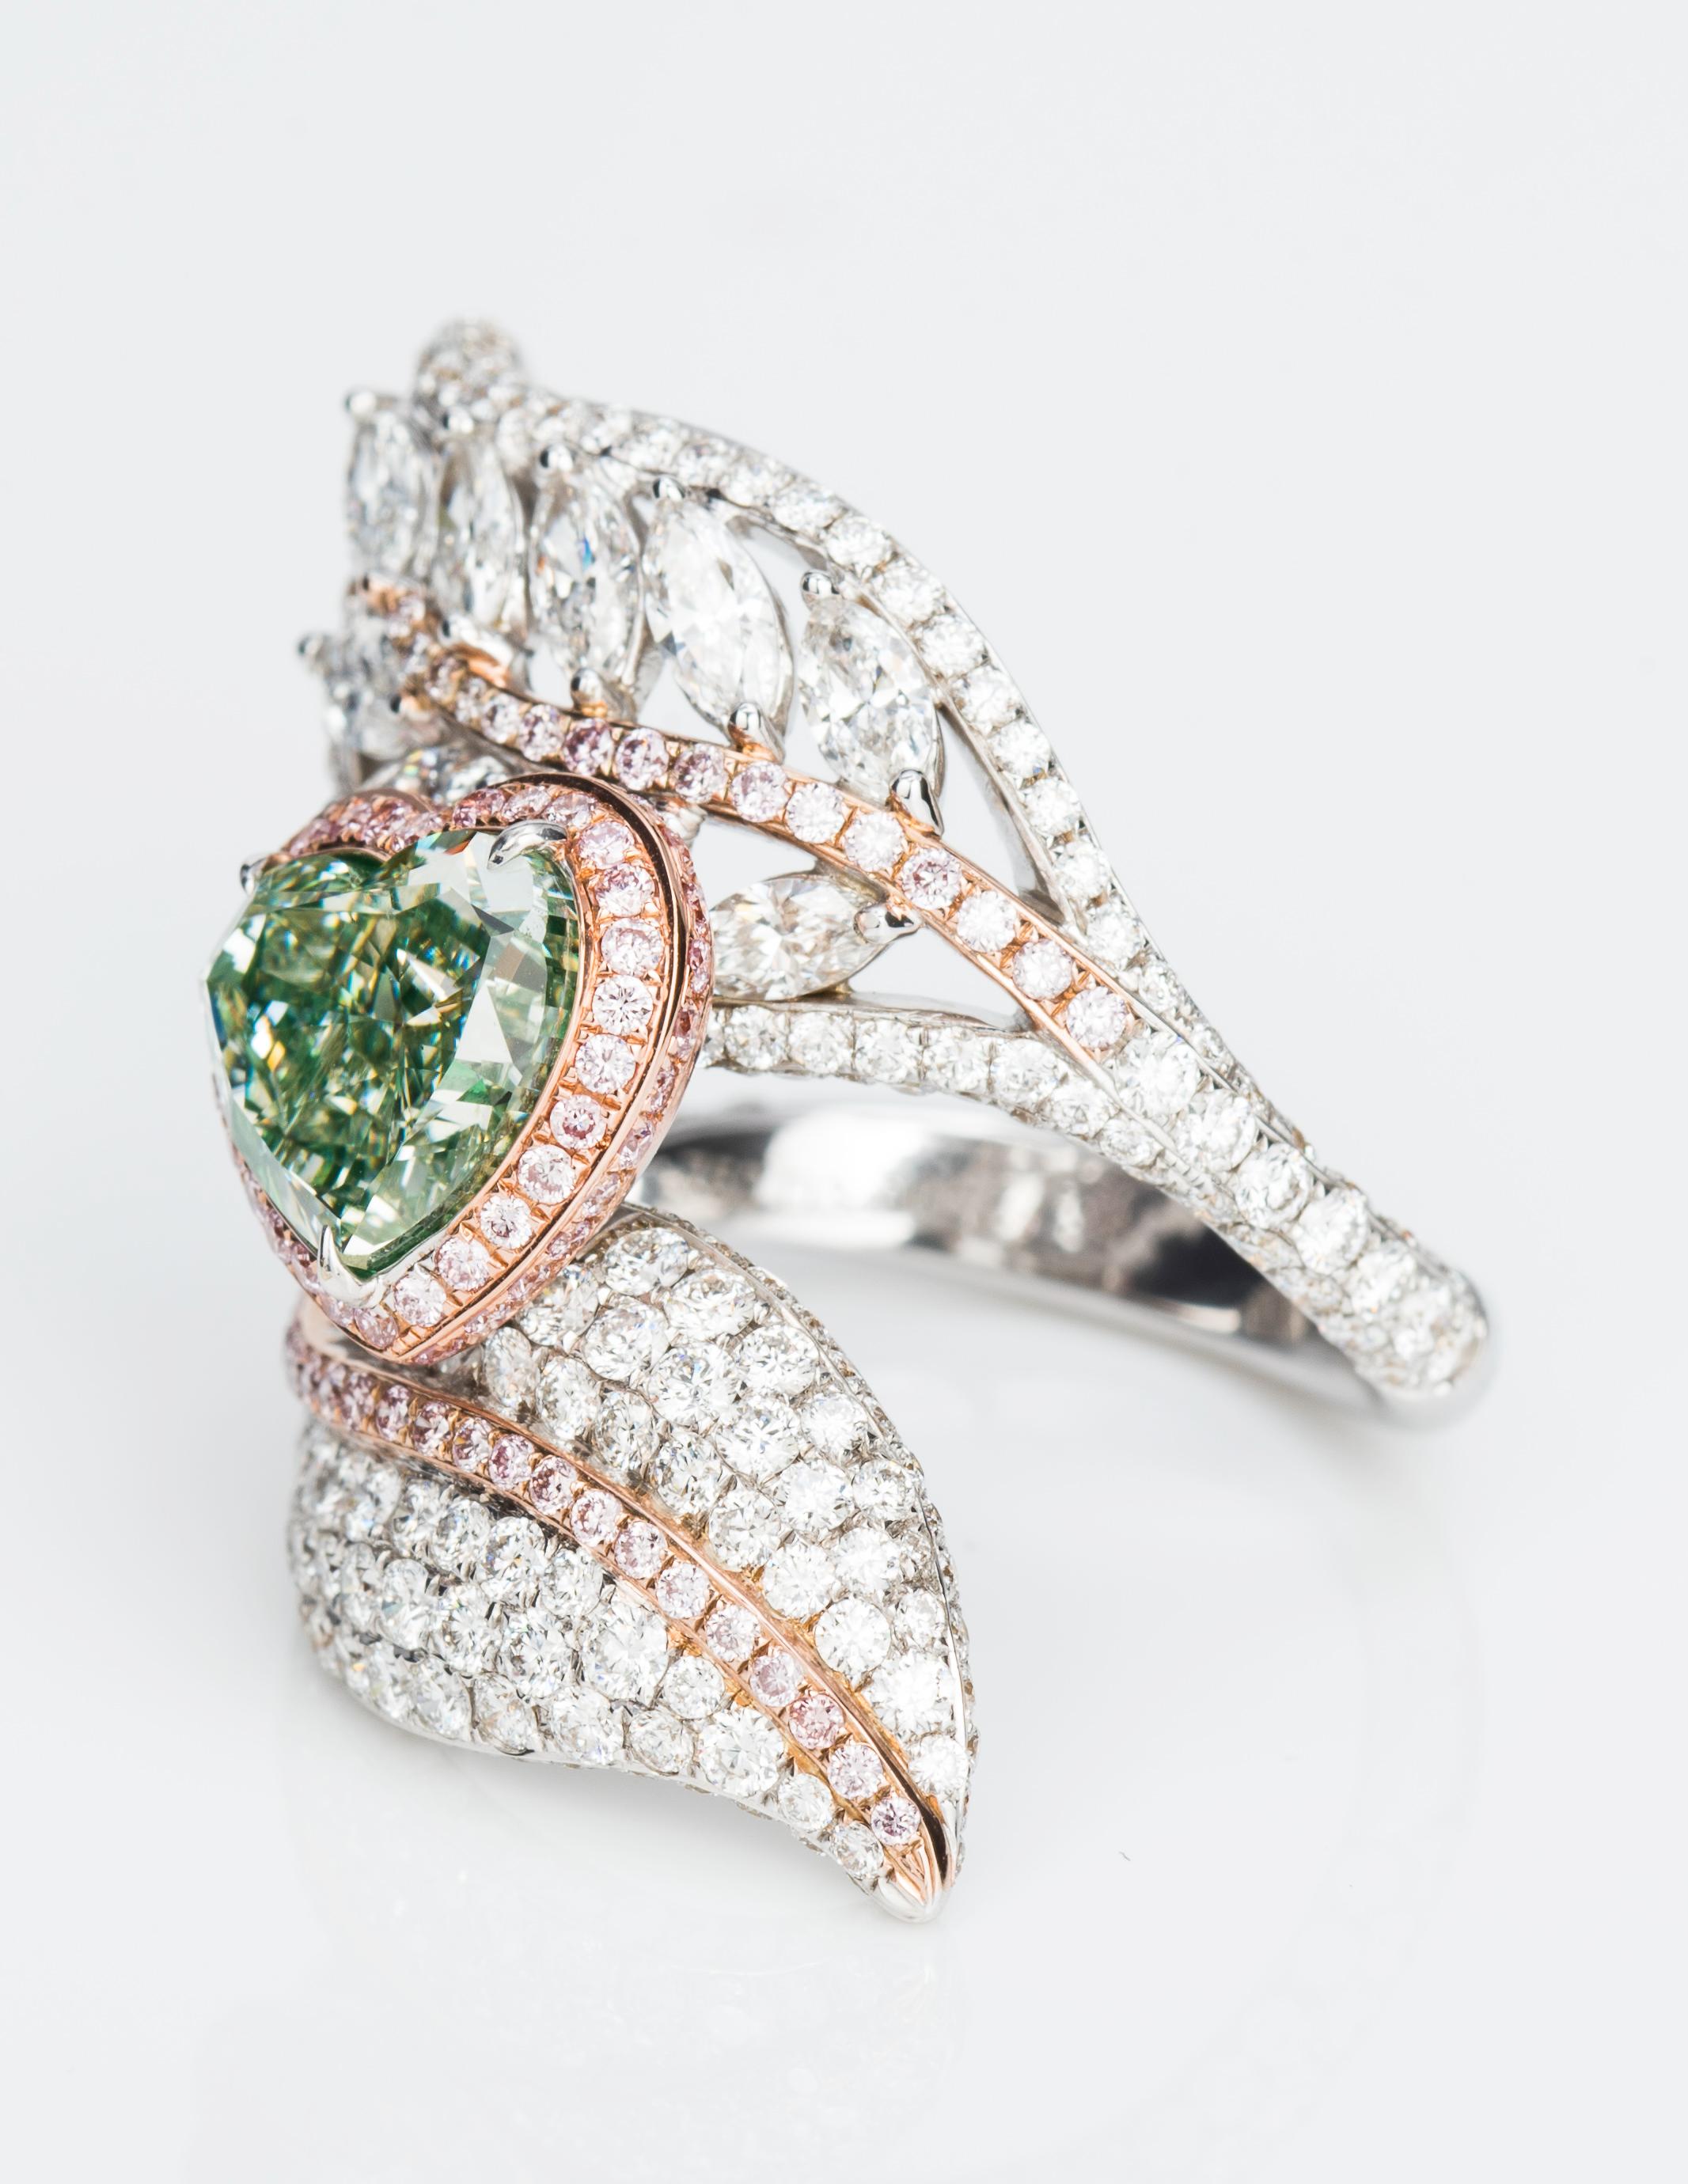 Contemporary GIA Certified 6.13 Carat Fancy Yellow Green and Pink Diamond Ring in 18k Gold For Sale